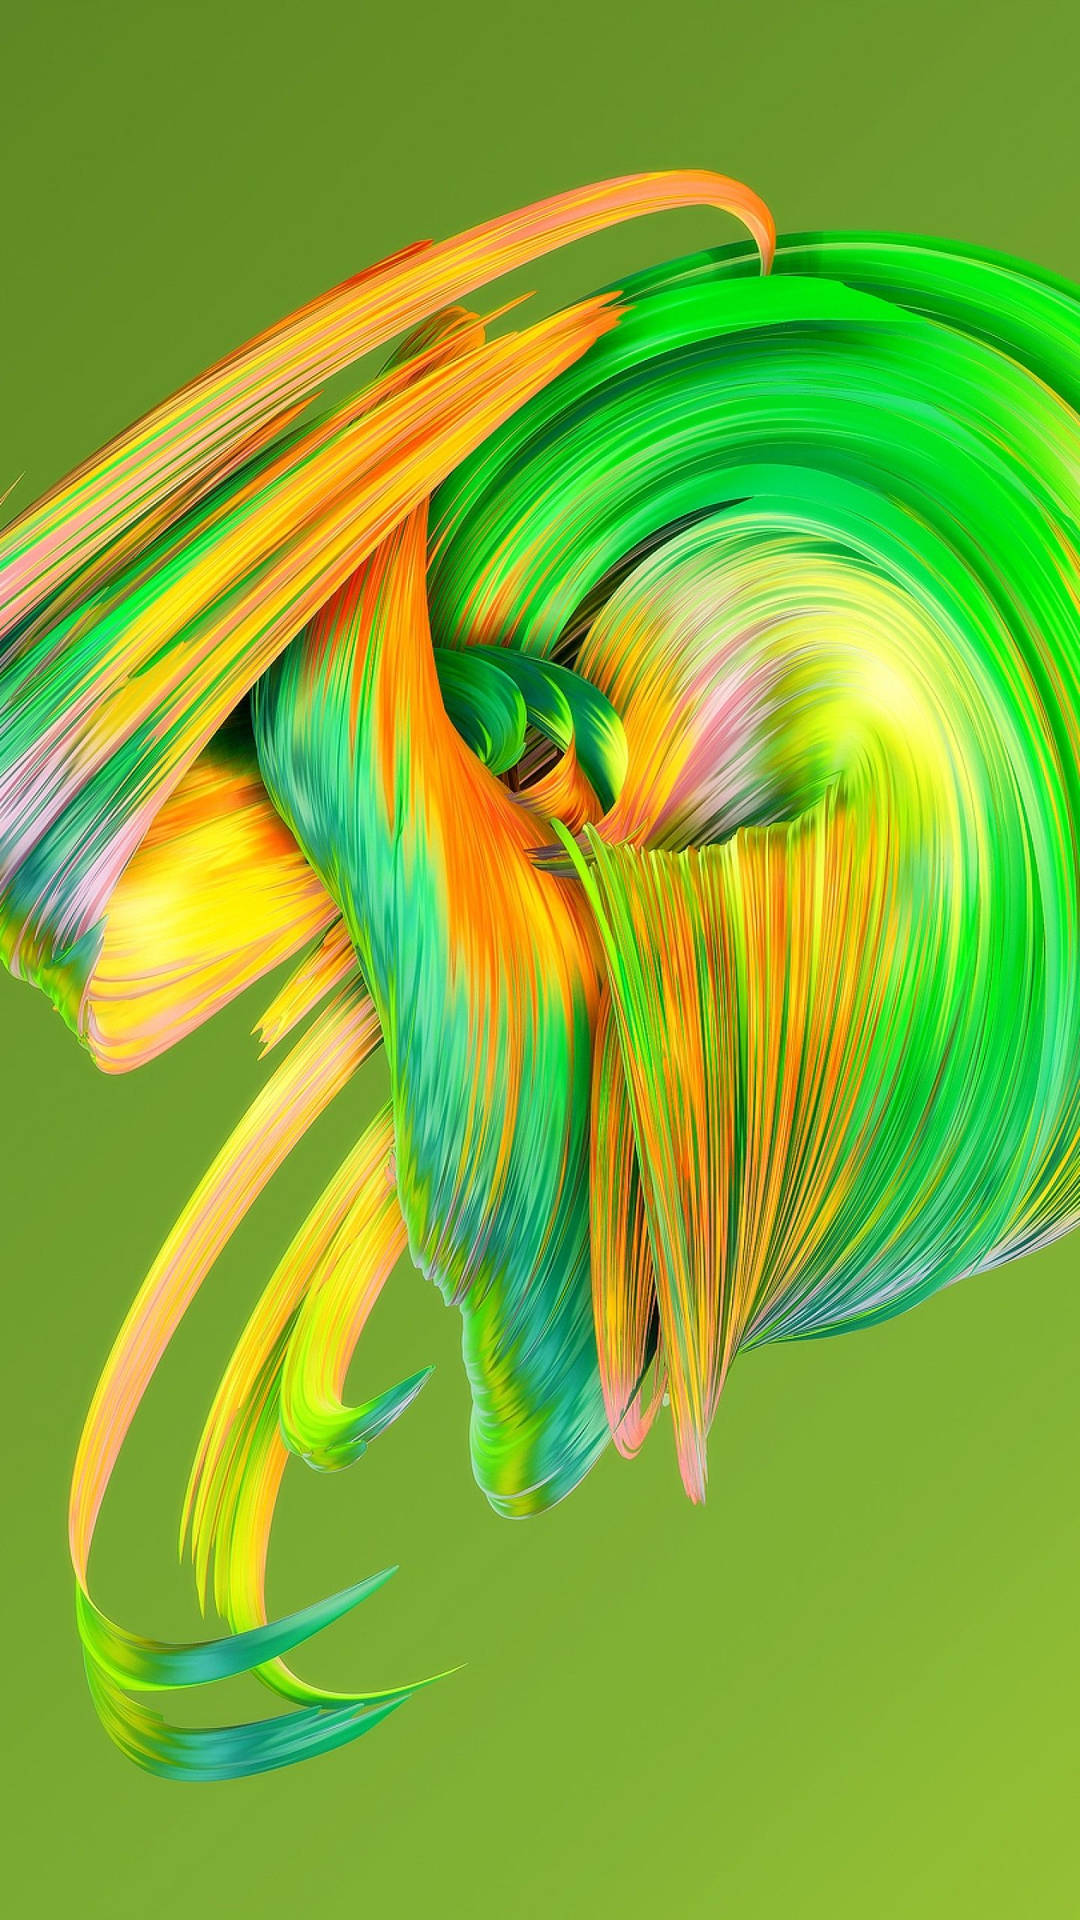 Orange And Light Green Abstract Wallpaper